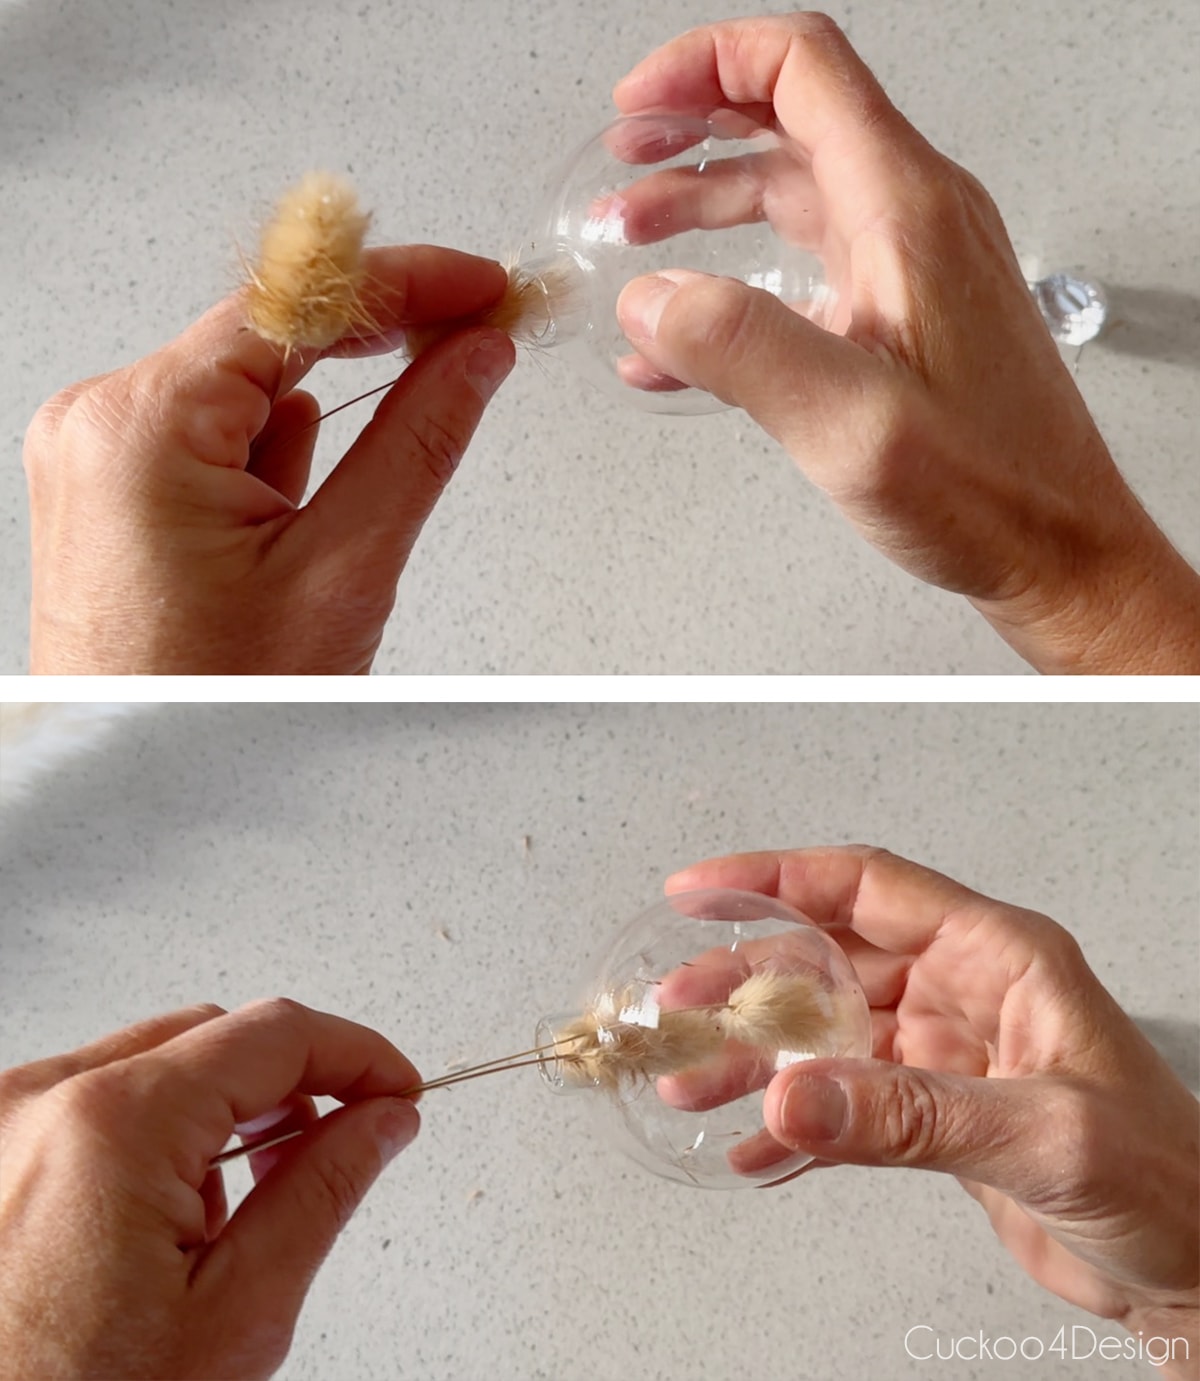 stuffing bunny tail grasses into an open glass Christmas ornament